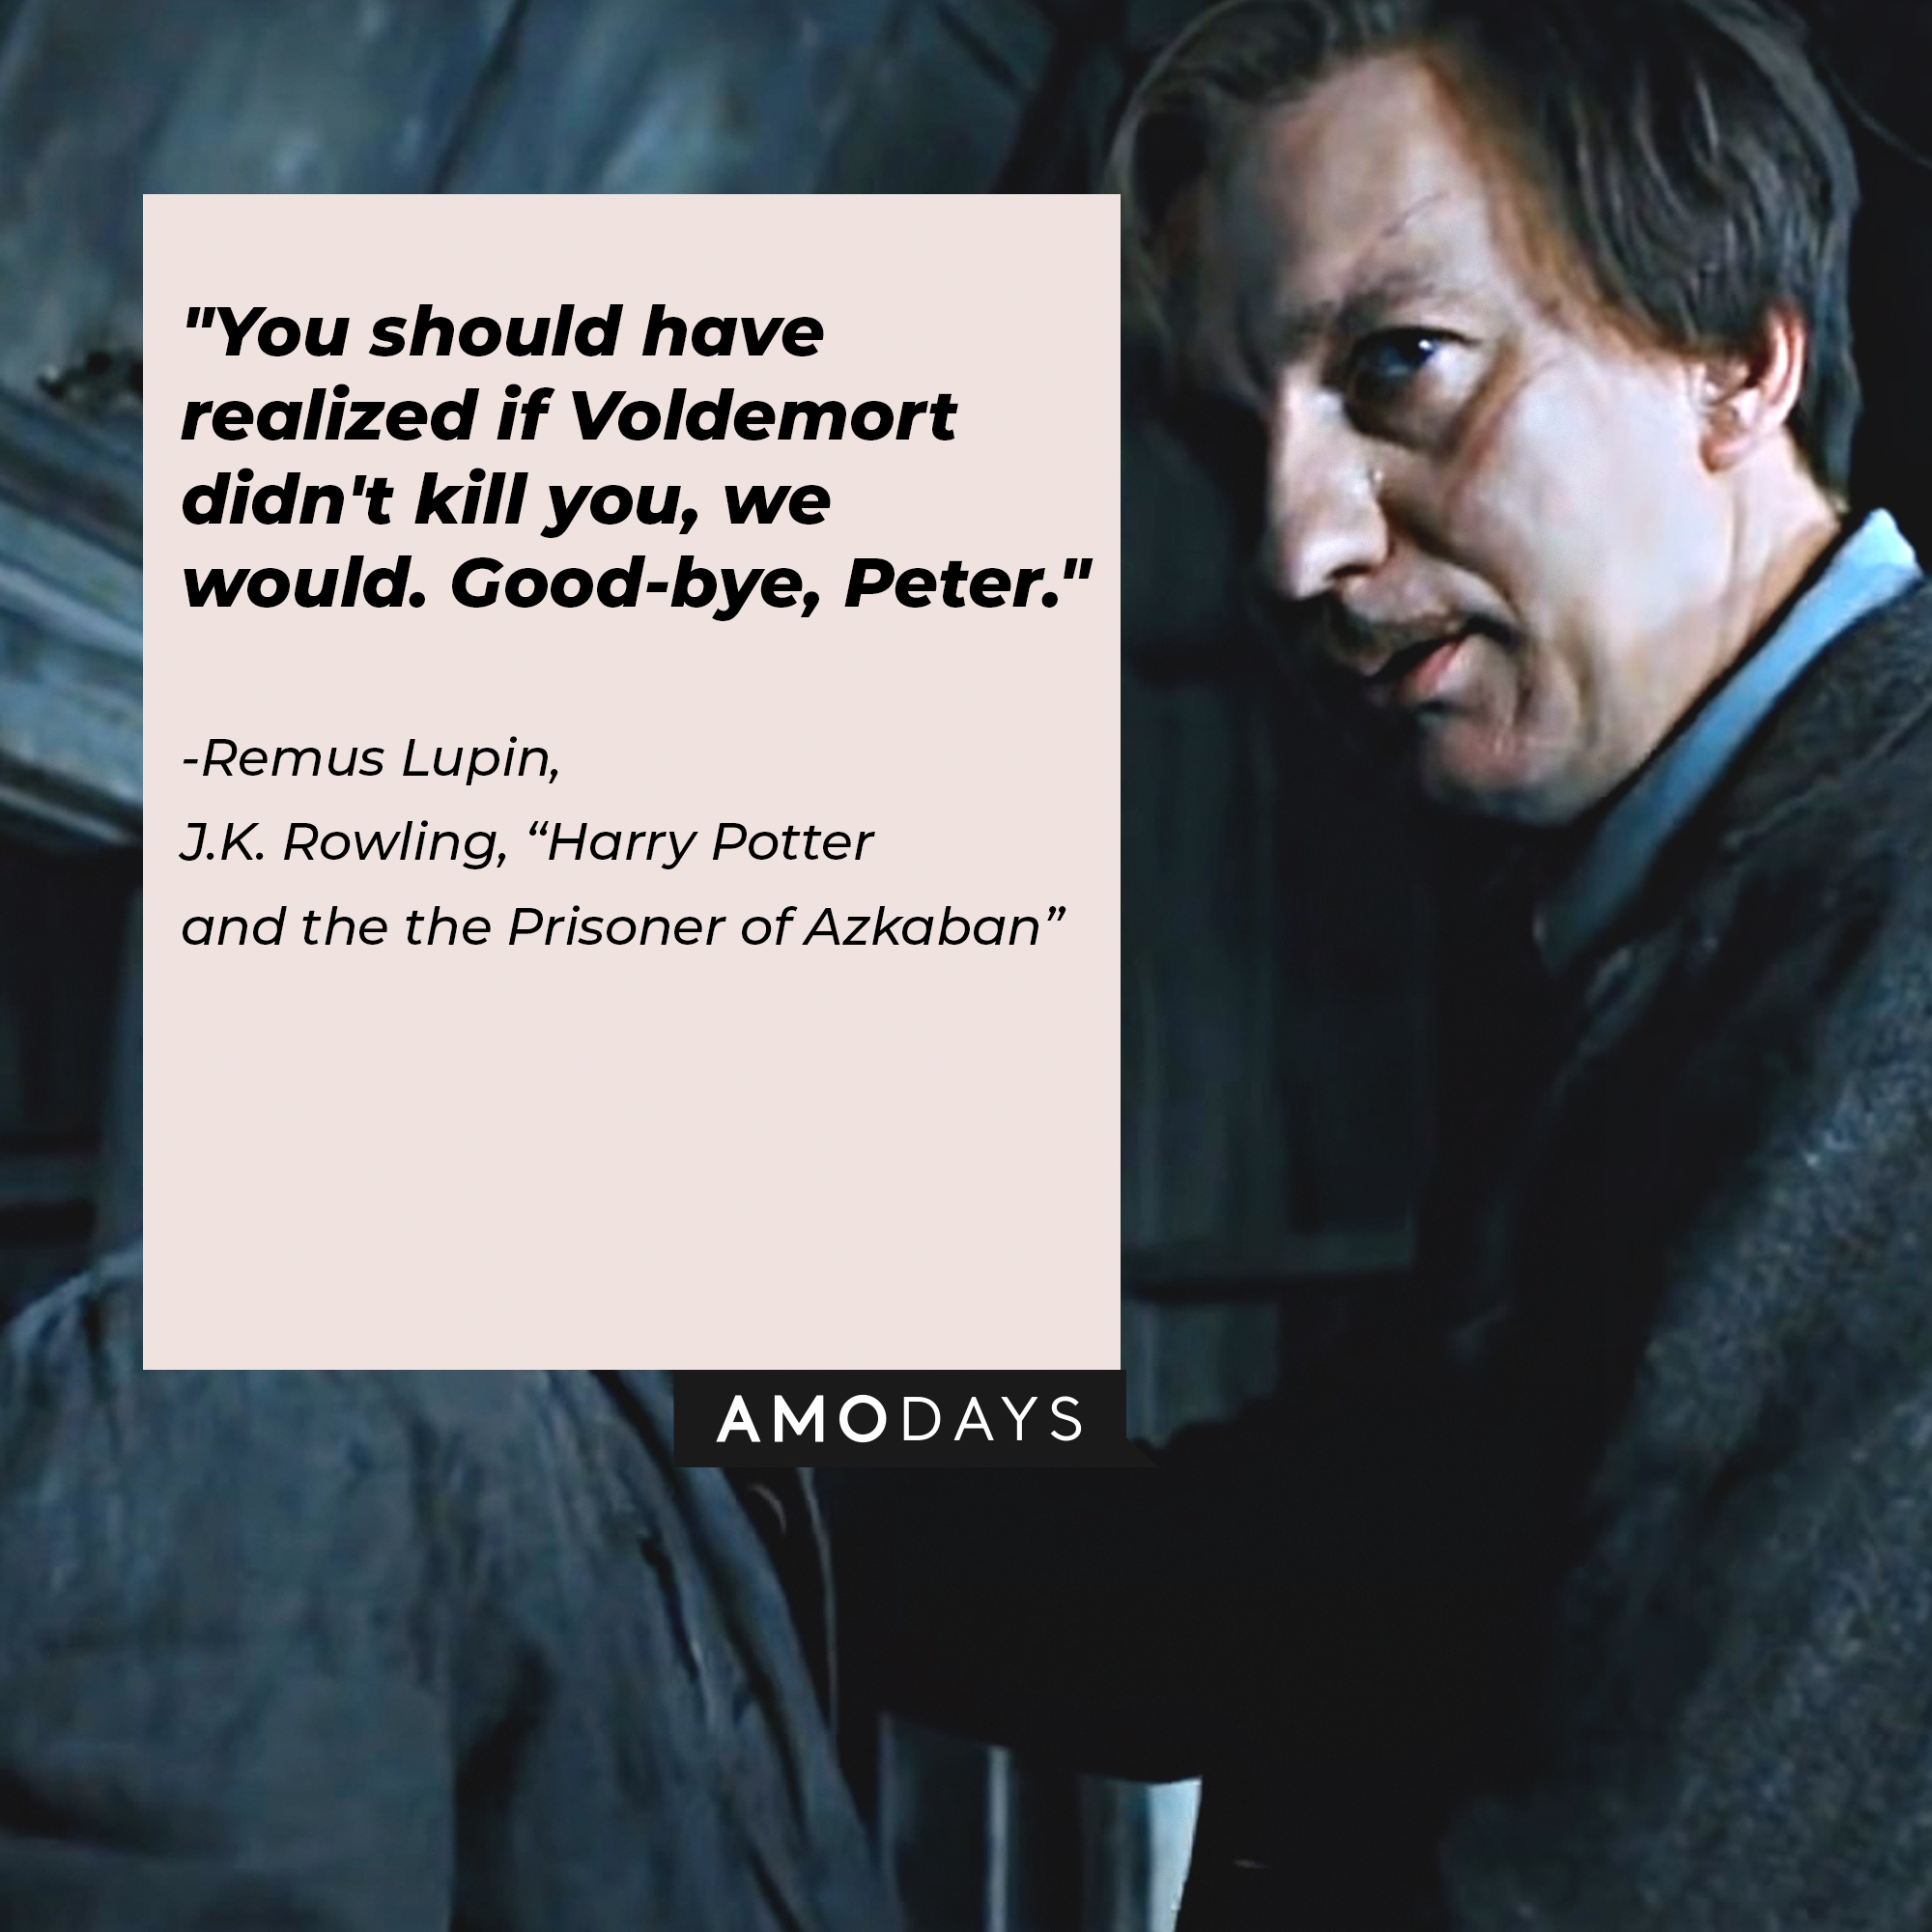 A picture of Remus Lupin with his quote: "You should have realized if Voldemort didn't kill you, we would. Good-bye, Peter." | Source: youtube.com/WarnerBrosPictures